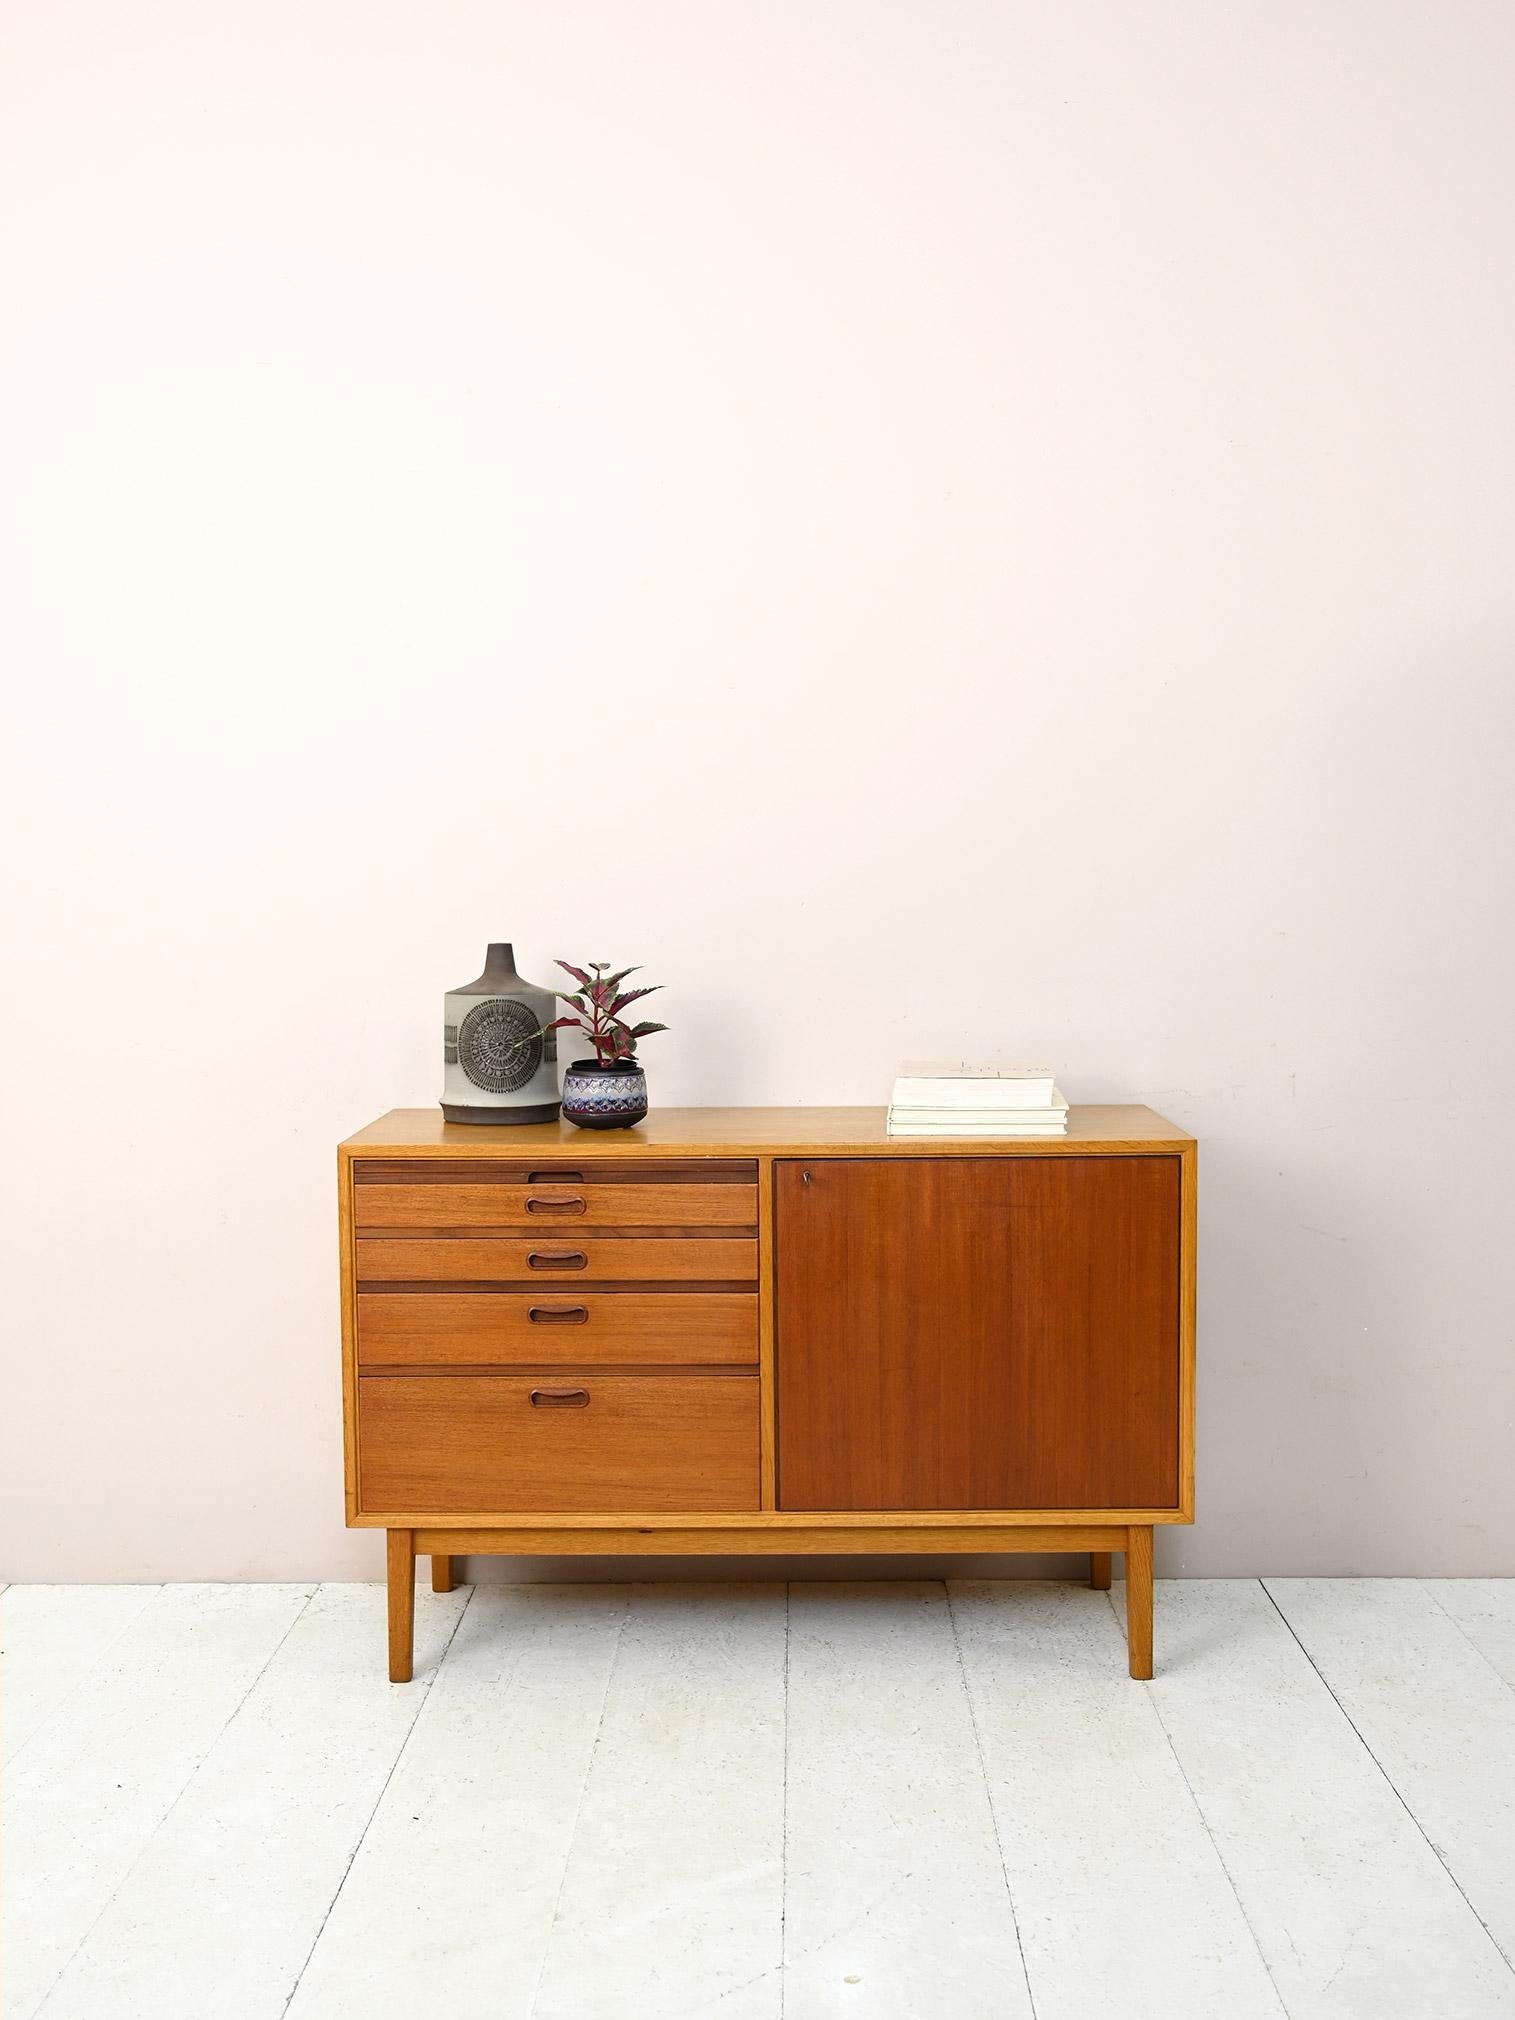 Vintage 1960s cabinet with drawers and storage compartment.

A beautiful and functional piece of furniture that can be placed in different rooms of the house and serve as a smart working station when needed.
Consisting of a teak and oak frame,